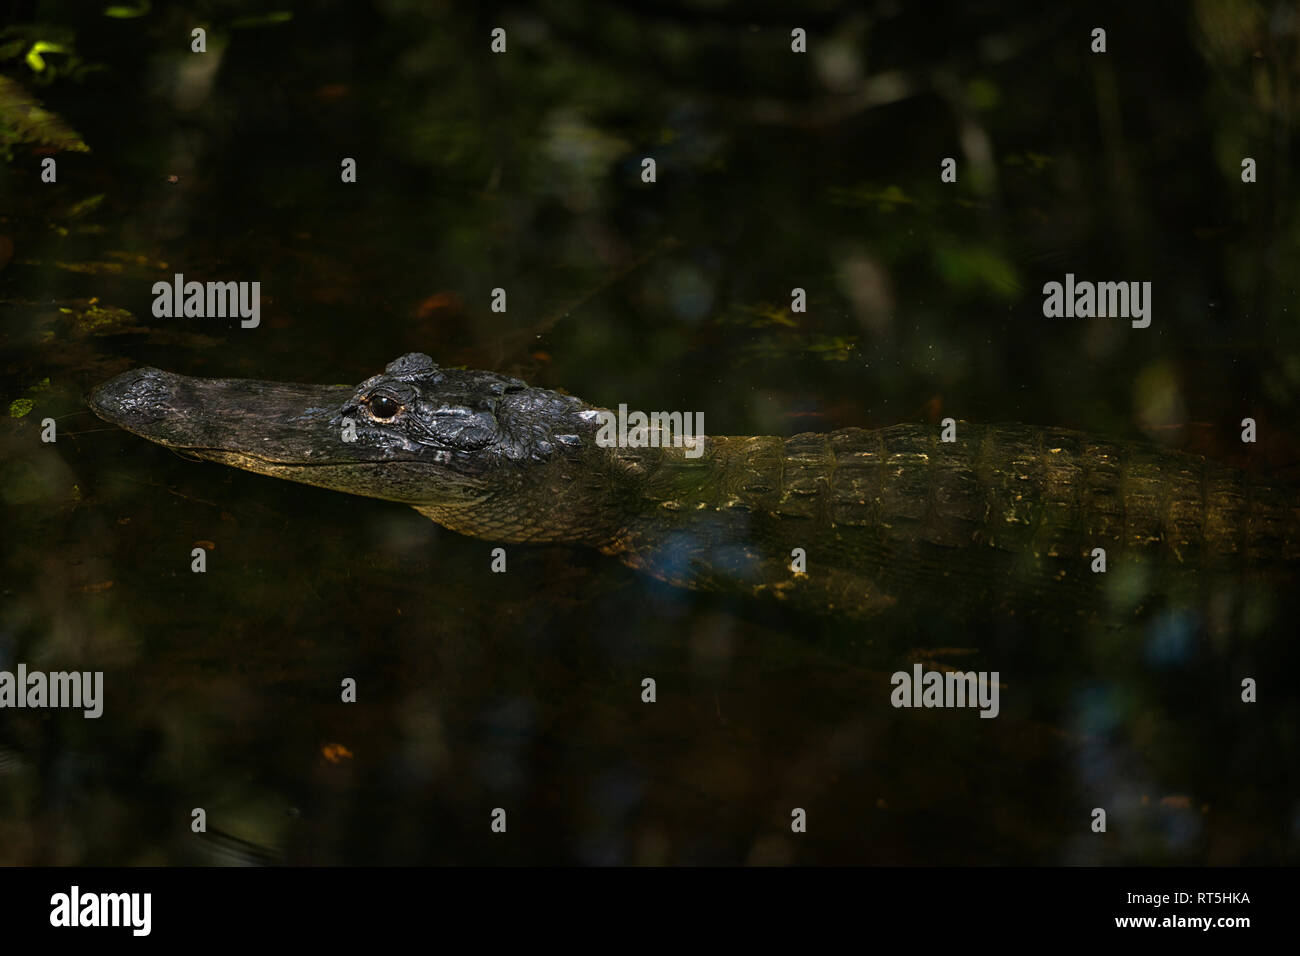 United States of America, Florida, Everglades, Copeland, American alligator (Alligator mississippiensis) in a swamp in the Fakahatchee Strand Preserve Stock Photo